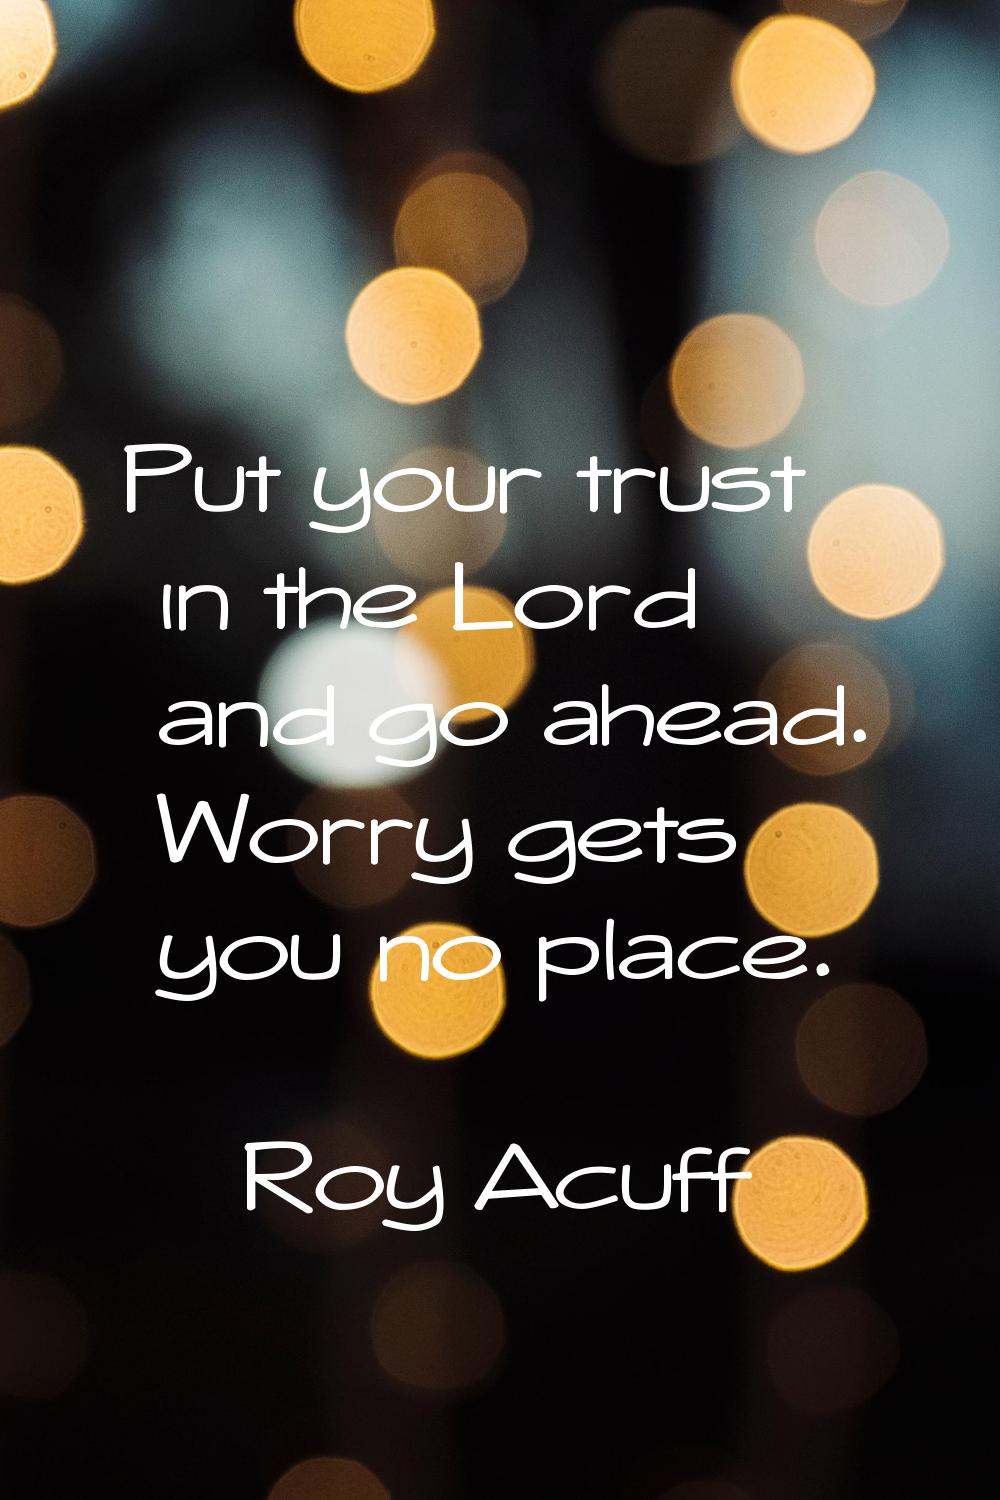 Put your trust in the Lord and go ahead. Worry gets you no place.